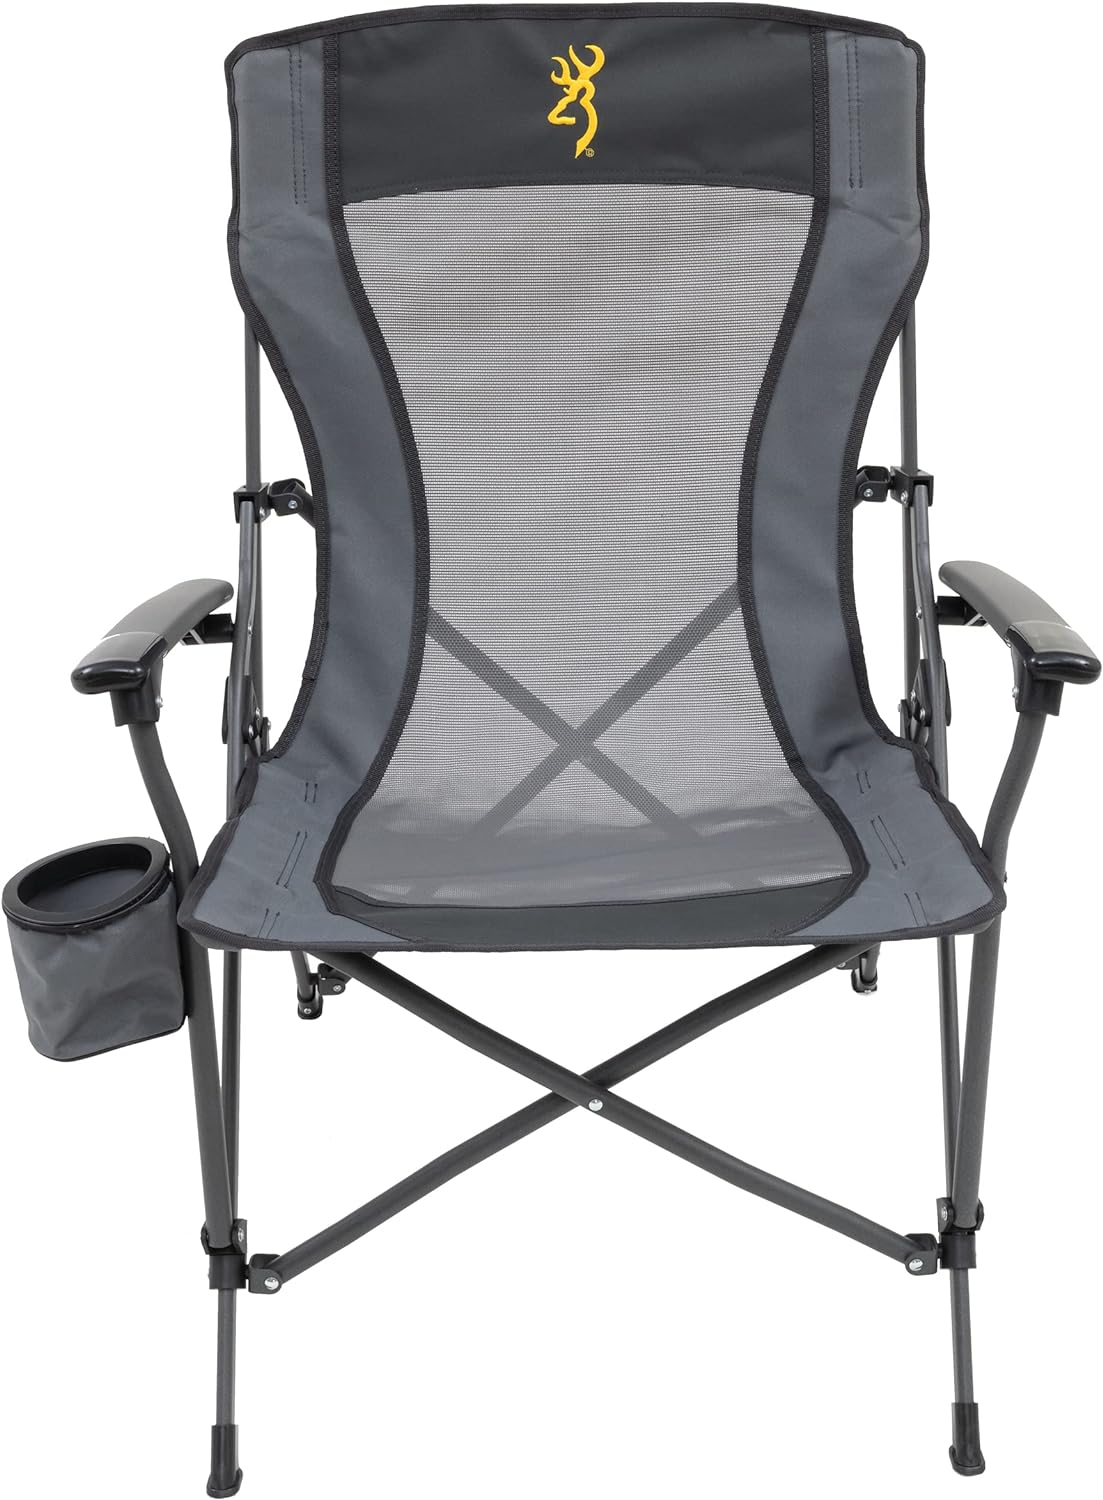 Browning Folding Camping Chairs for Adults - Durable Mesh Fabric Over Sturdy Powder Coated Steel Frame, Armrests Cup Holder, and Shoulder Carry Bag